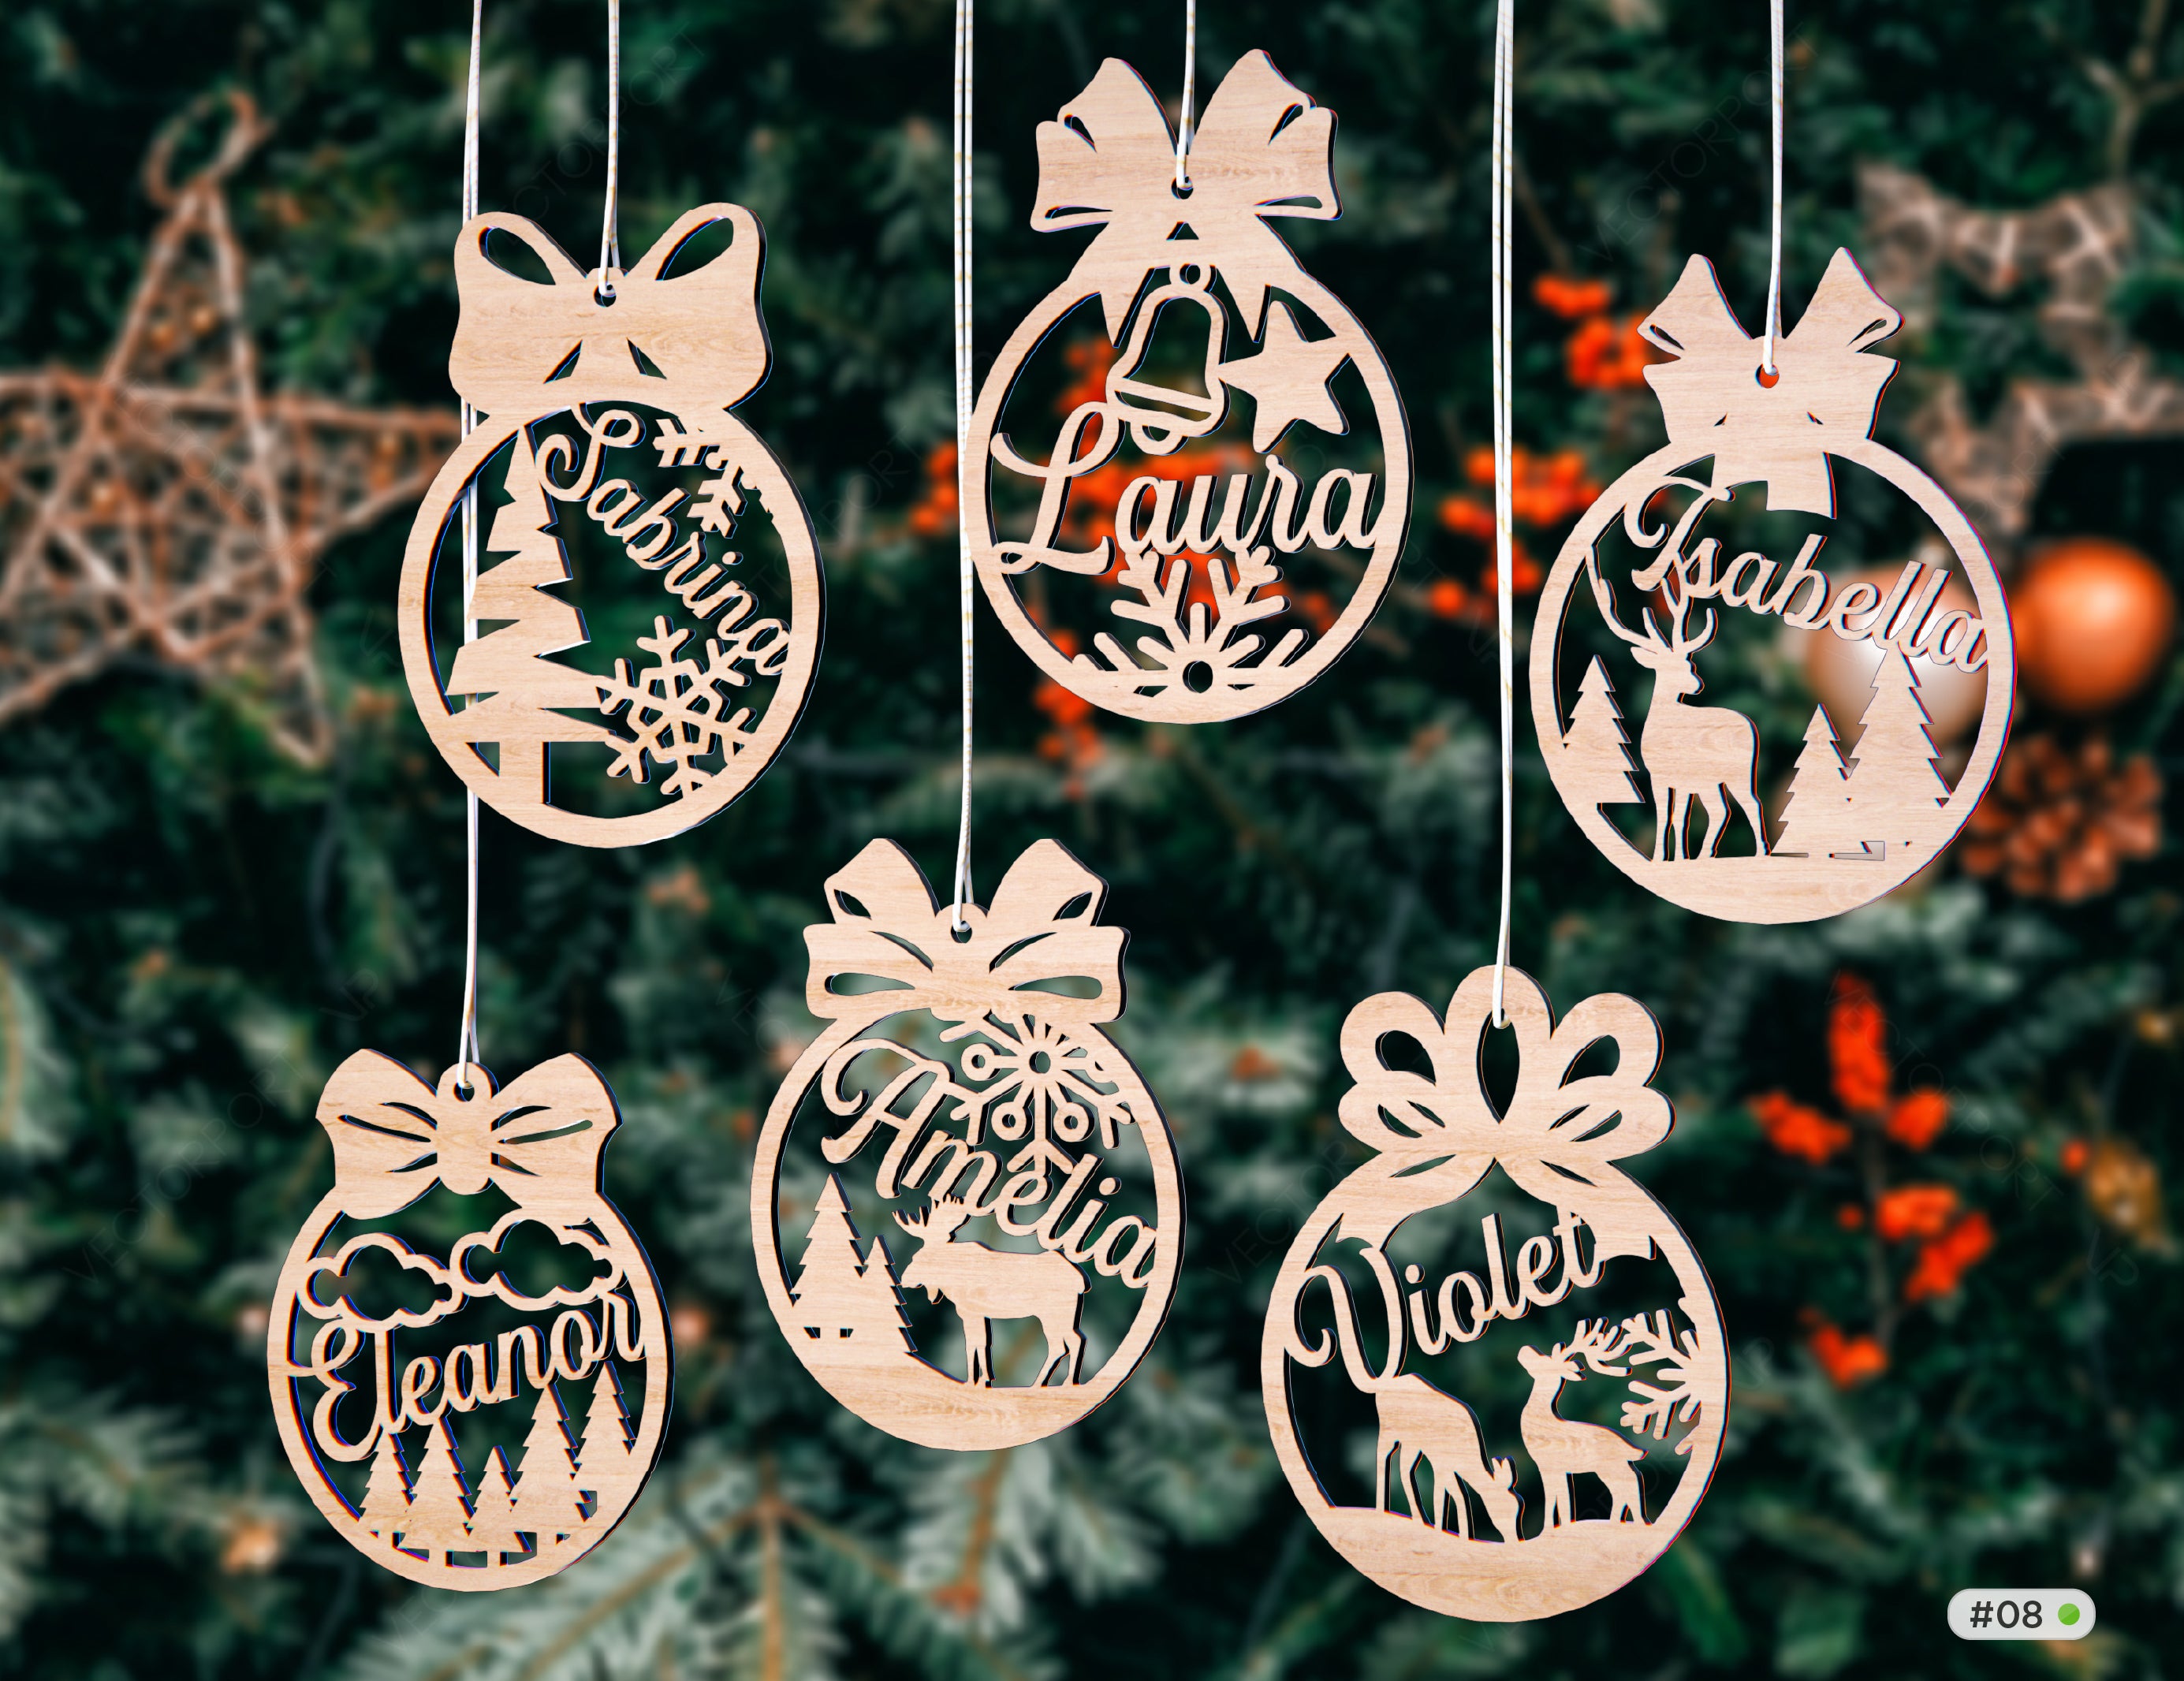 Personalized Christmas balls Tree Decorations with Name Craft Hanging Bauble Paper art templates cut file |#U100|